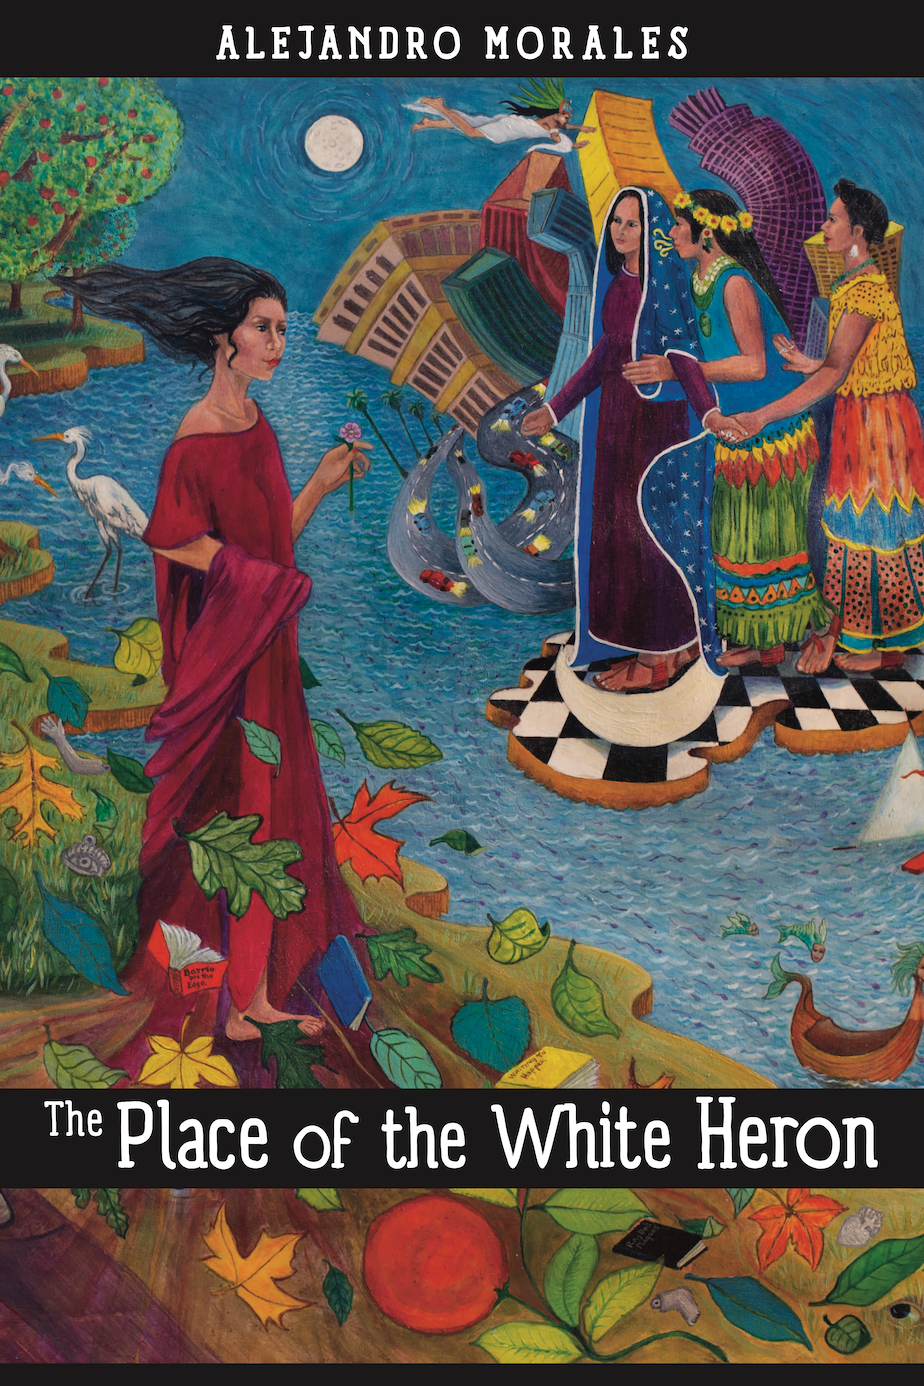 The Place of the White Heron